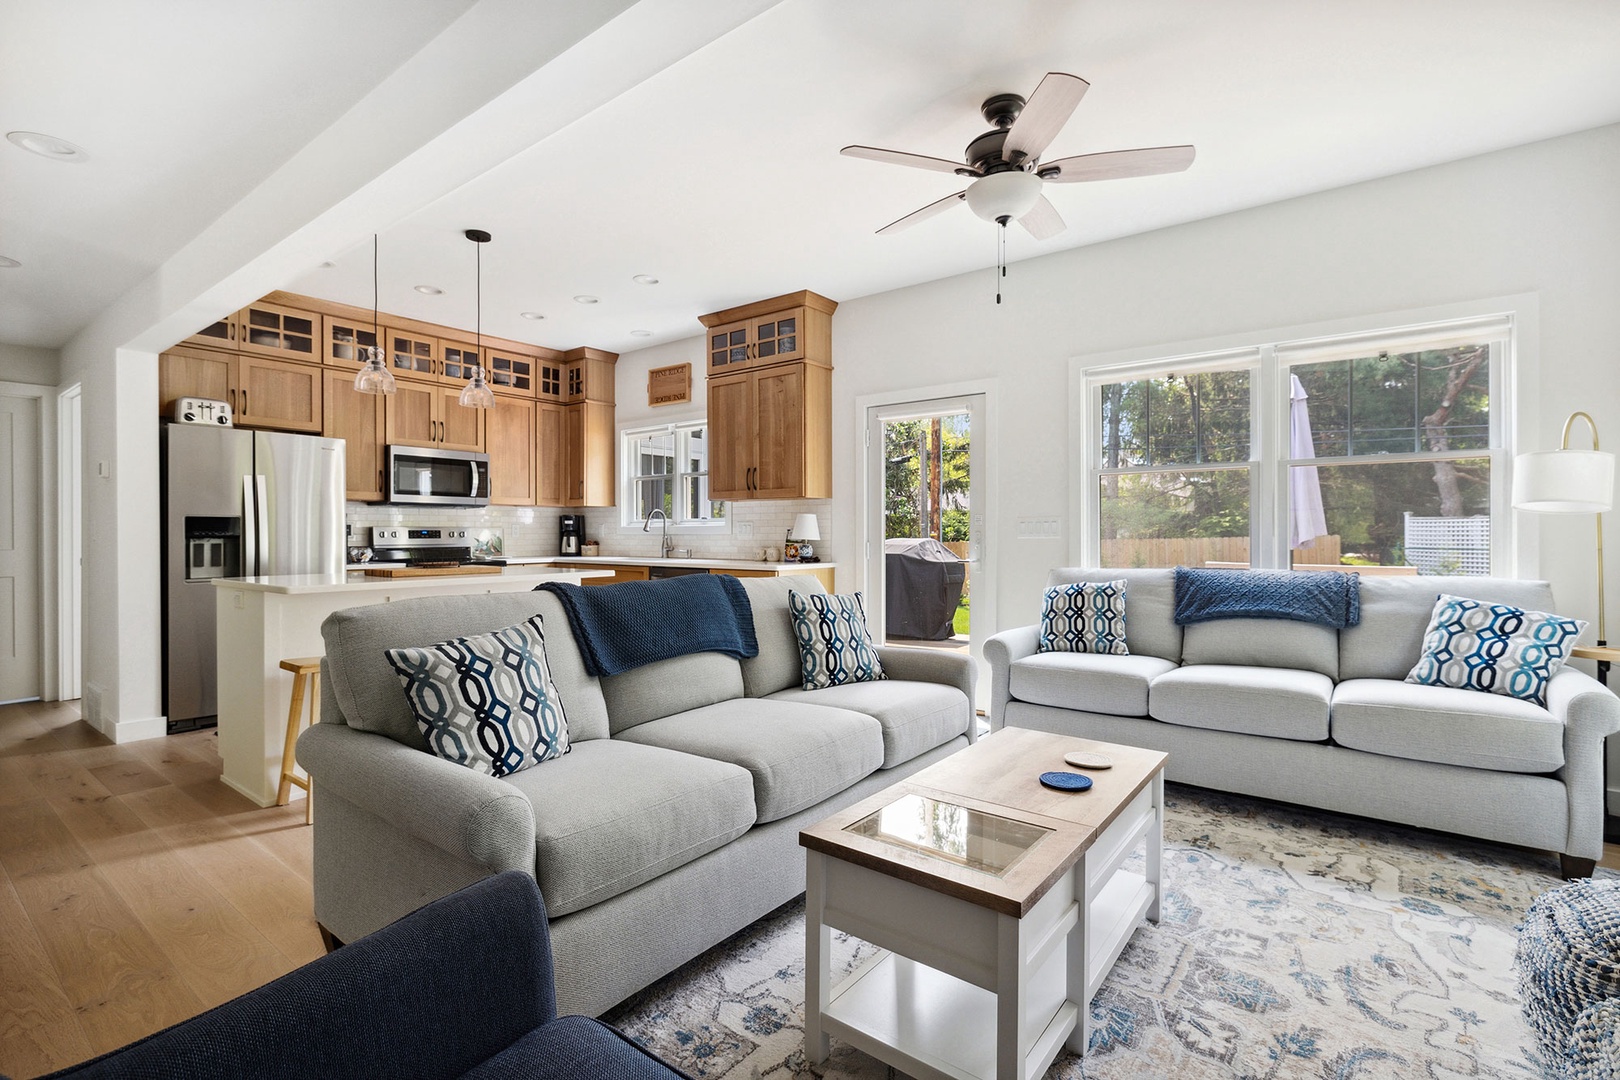 The open living area lets everyone feel together, from the cozy seating to the modern design.